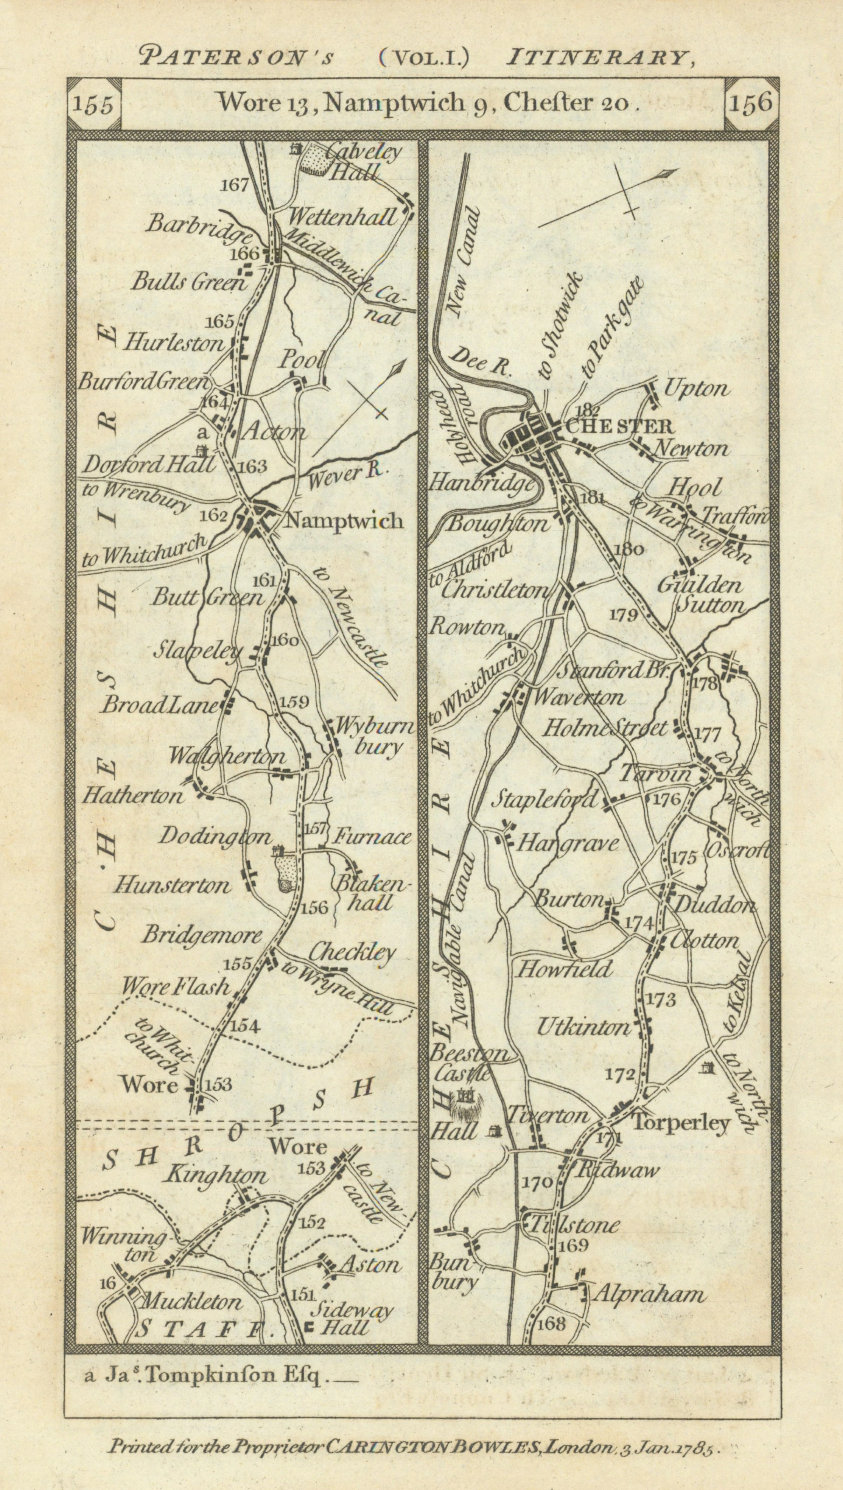 Associate Product Nantwich - Tarporley - Chester road strip map PATERSON 1785 old antique